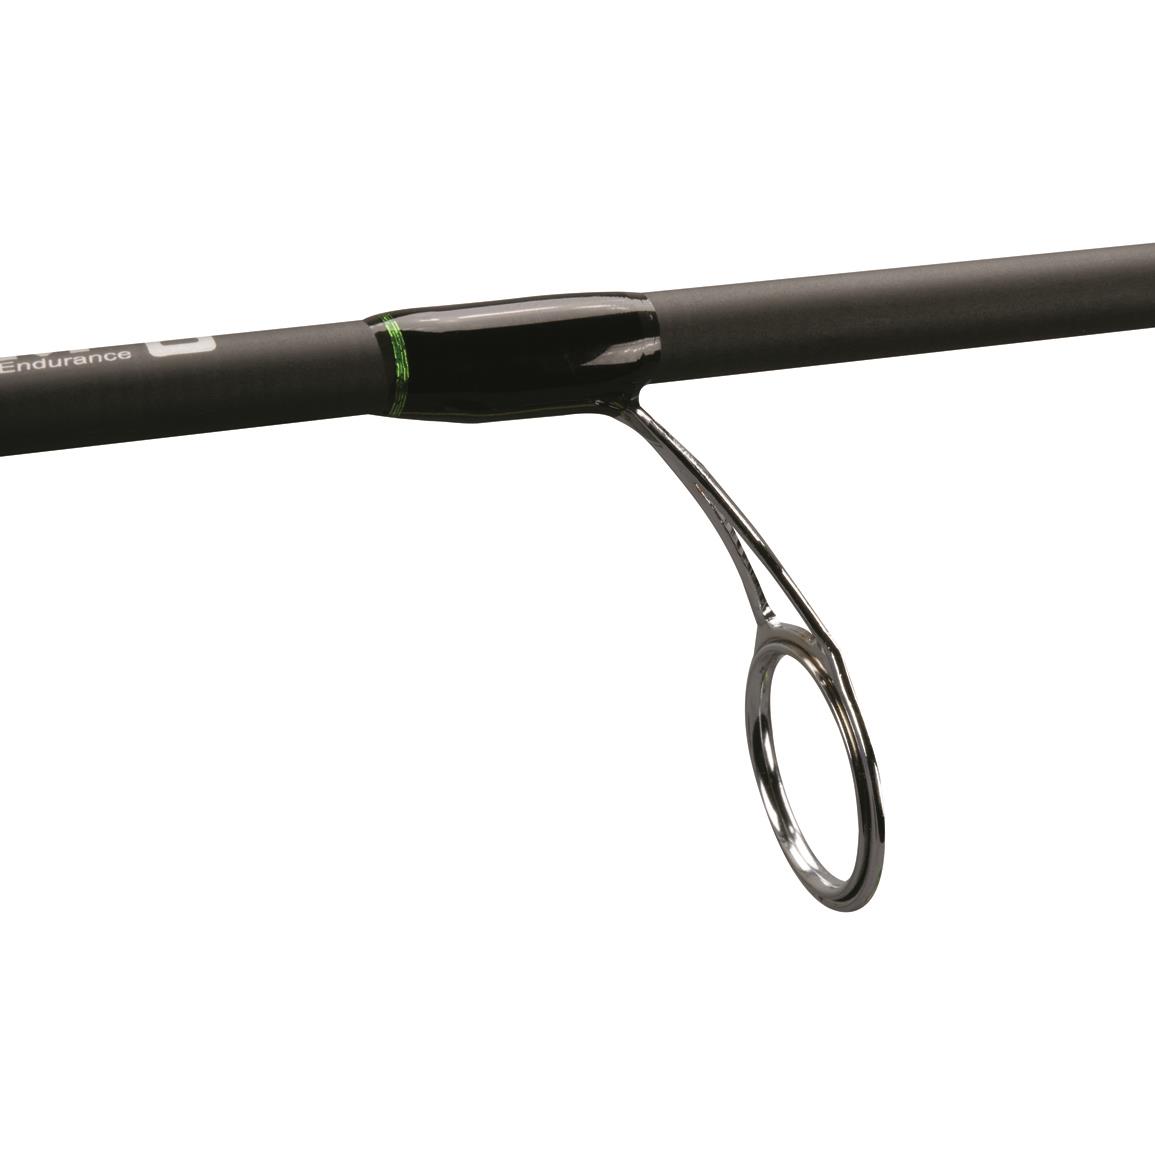 Zebco Crappie Fighter 12' Spinning Combo Fishing Rod #CRFUL122LA